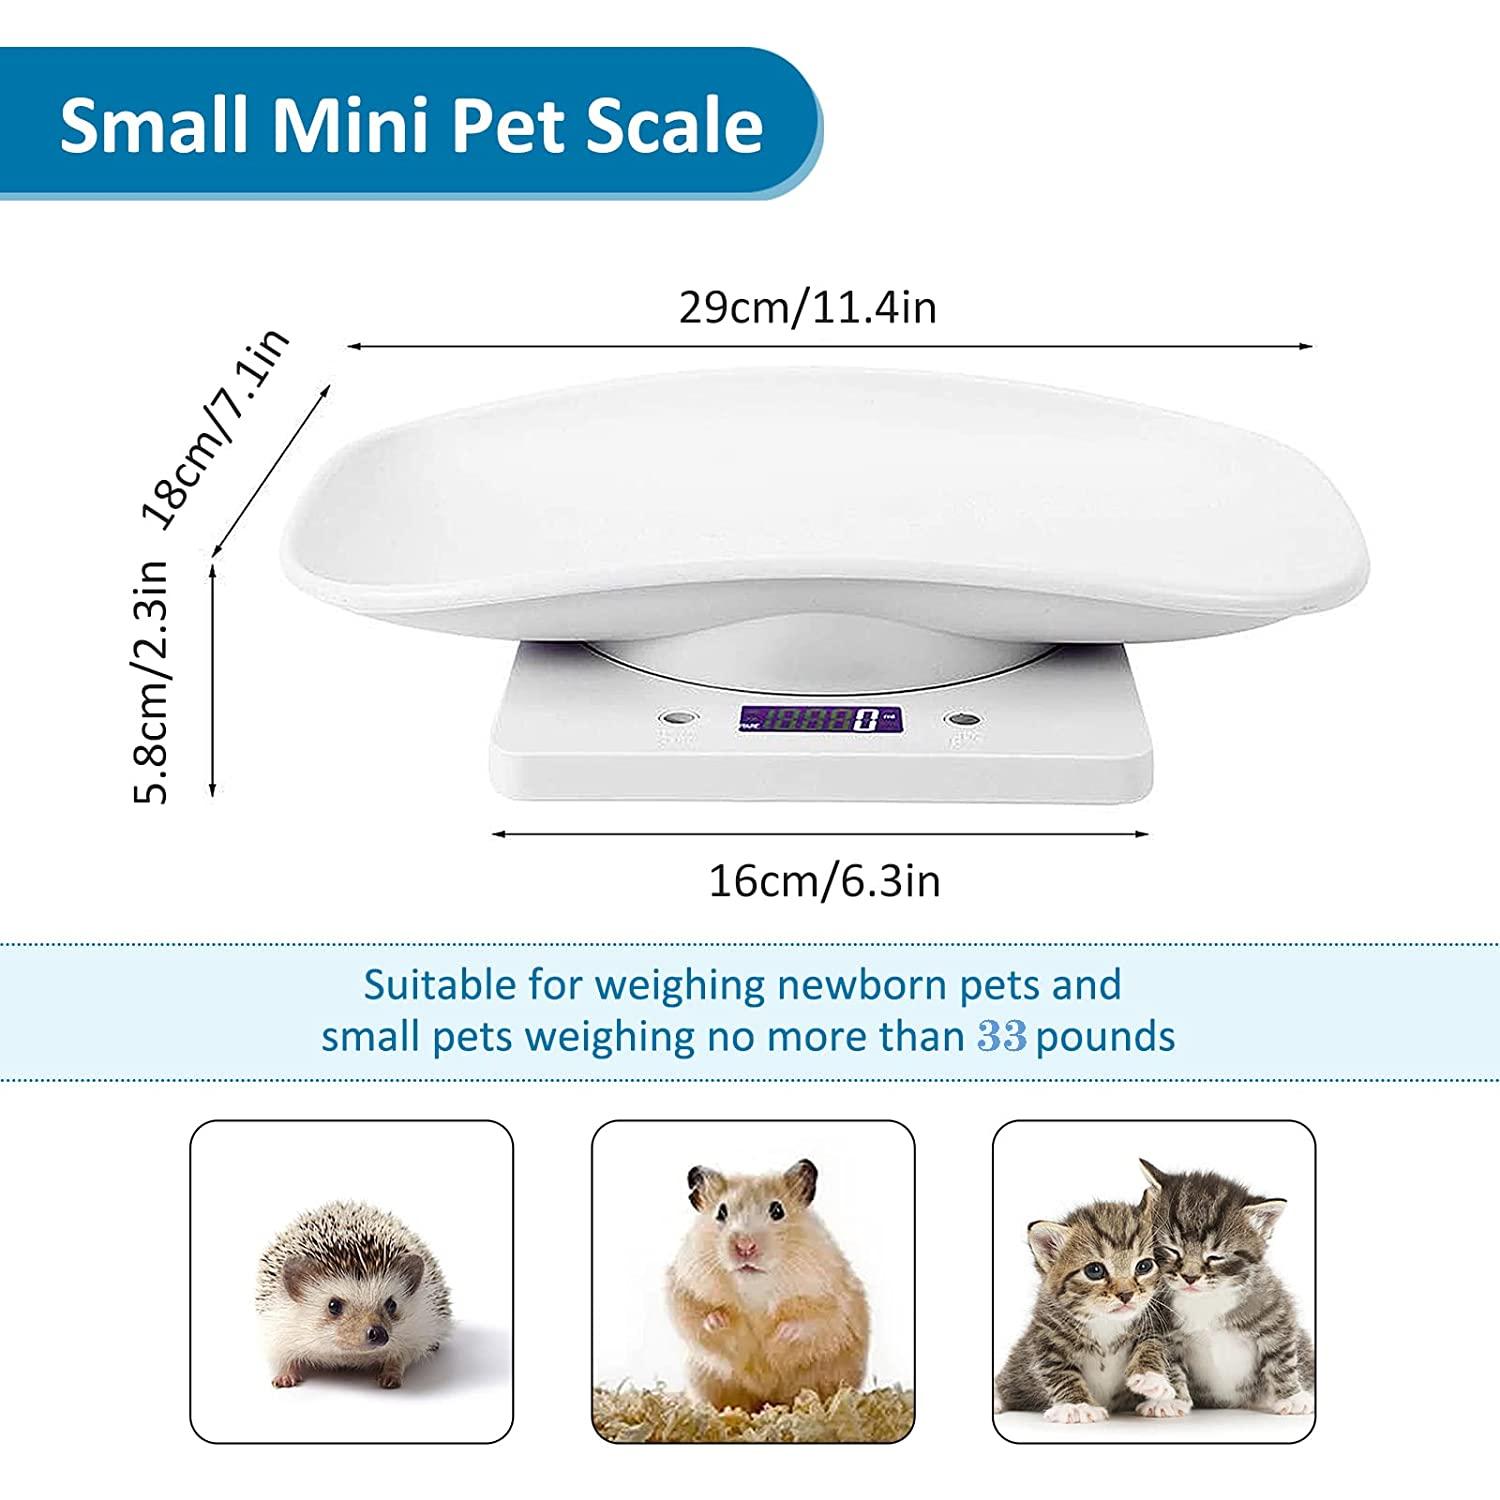 Digital Pet Scale, Small Animal Scale with LCD Display, Multifunction  Kitchen Food Scale, Weighing Max 33lbs, Size 12x 8 Inch for Weight Scale  with New Born Kitten and Puppy(White)